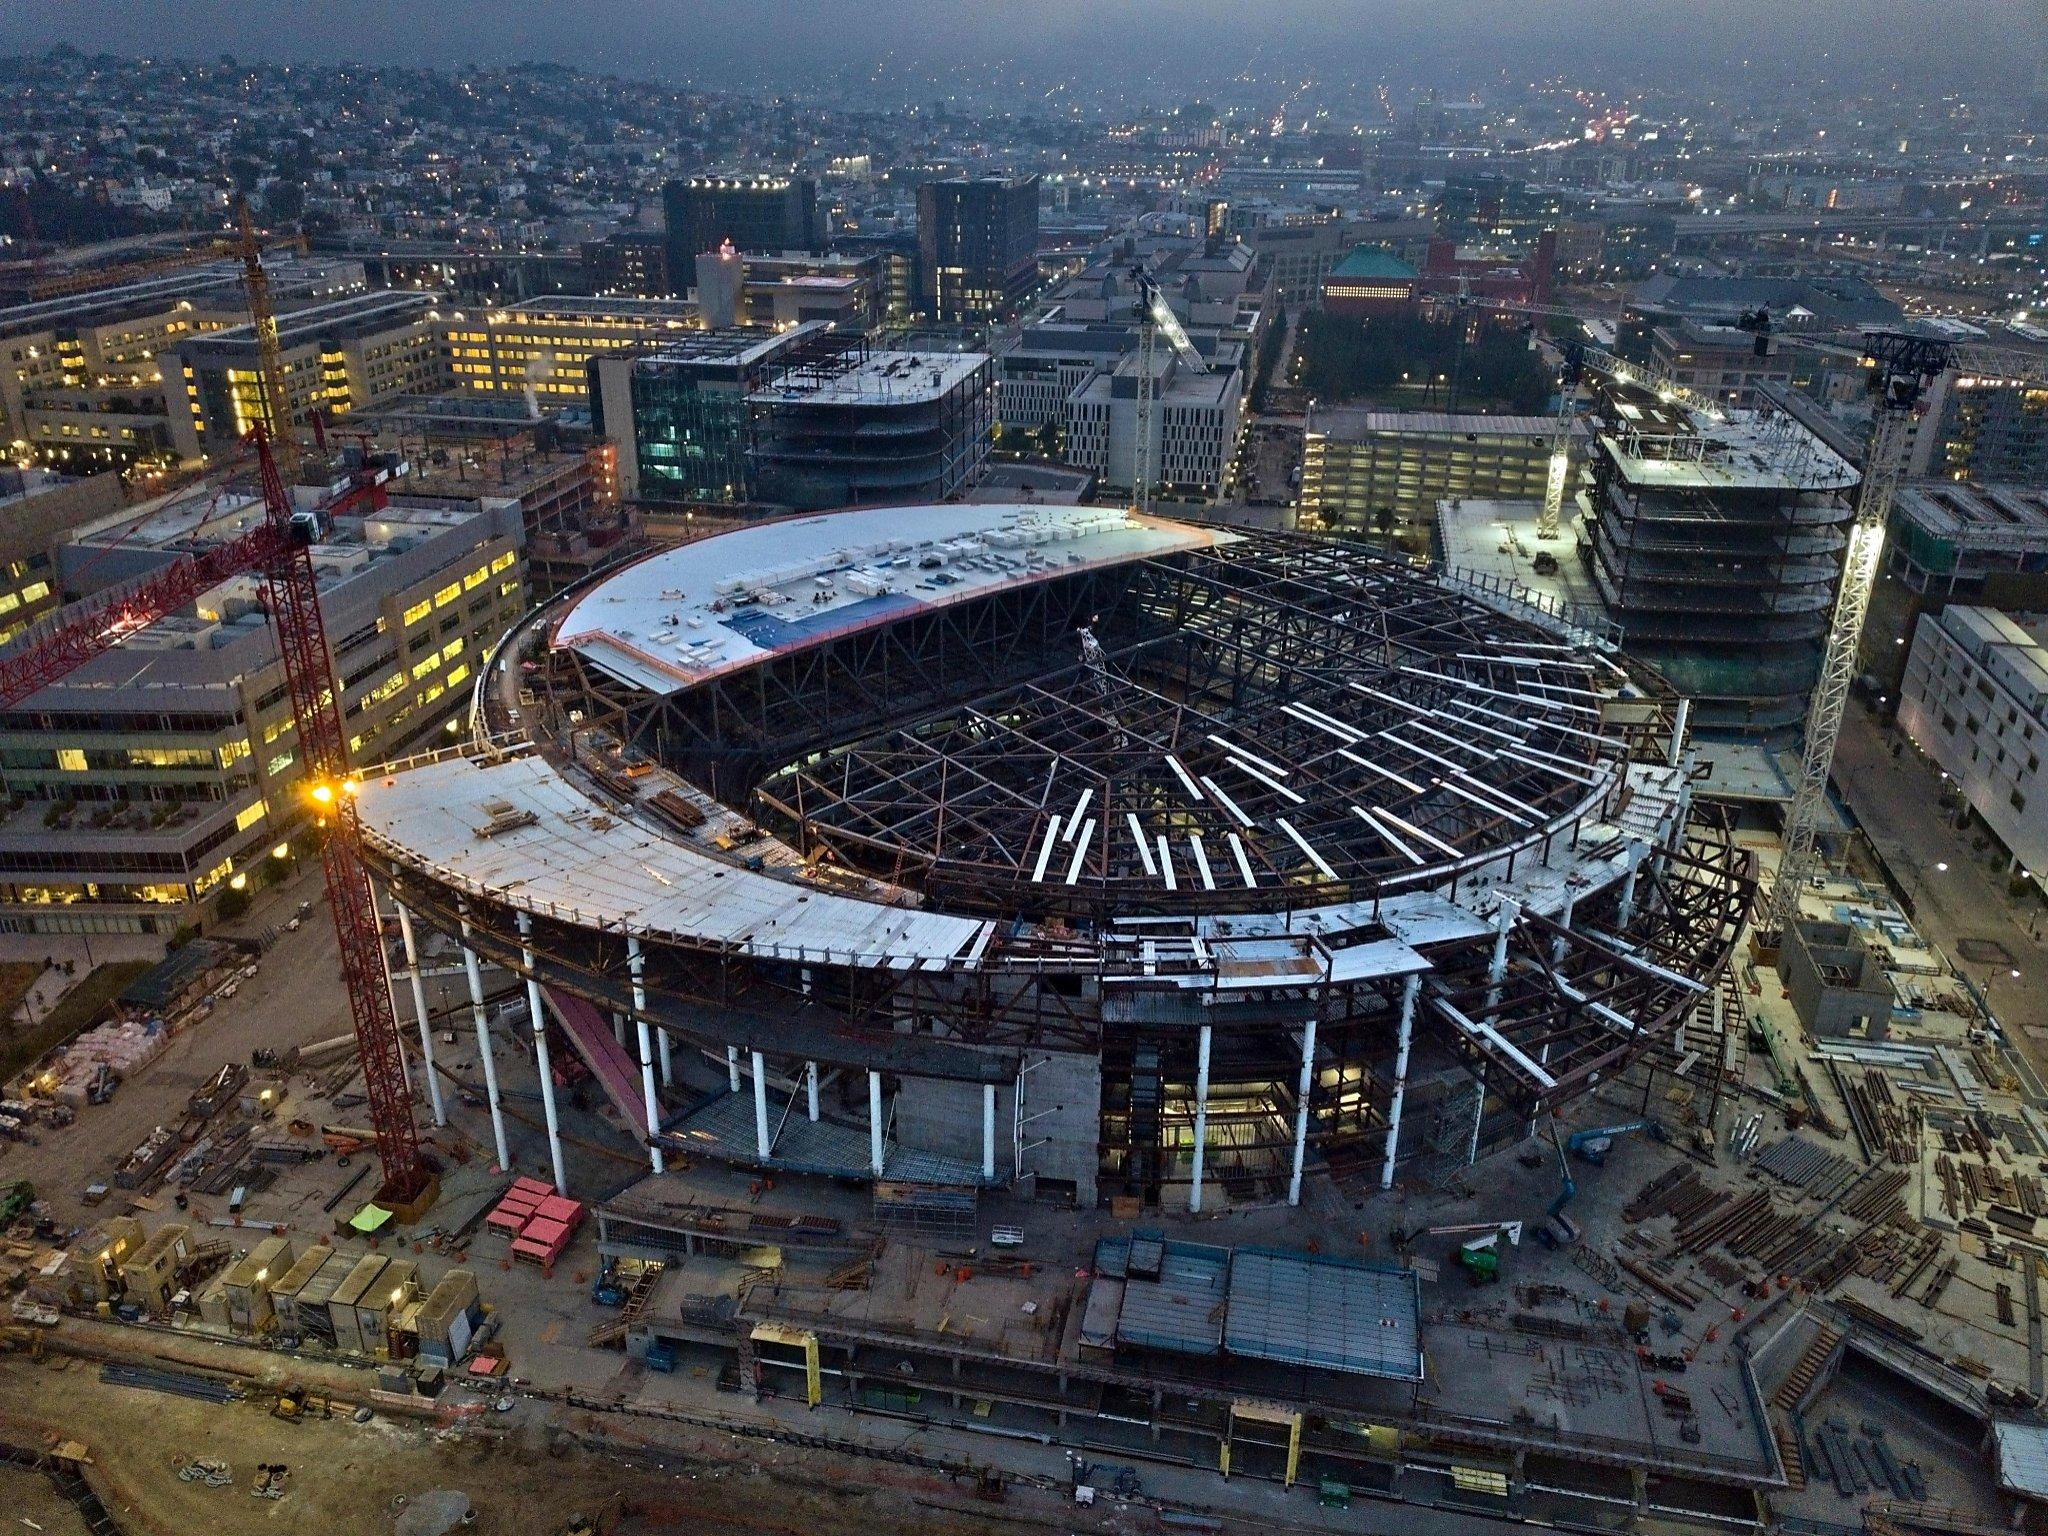 Warriors' season tickets sell swiftly as arena rises